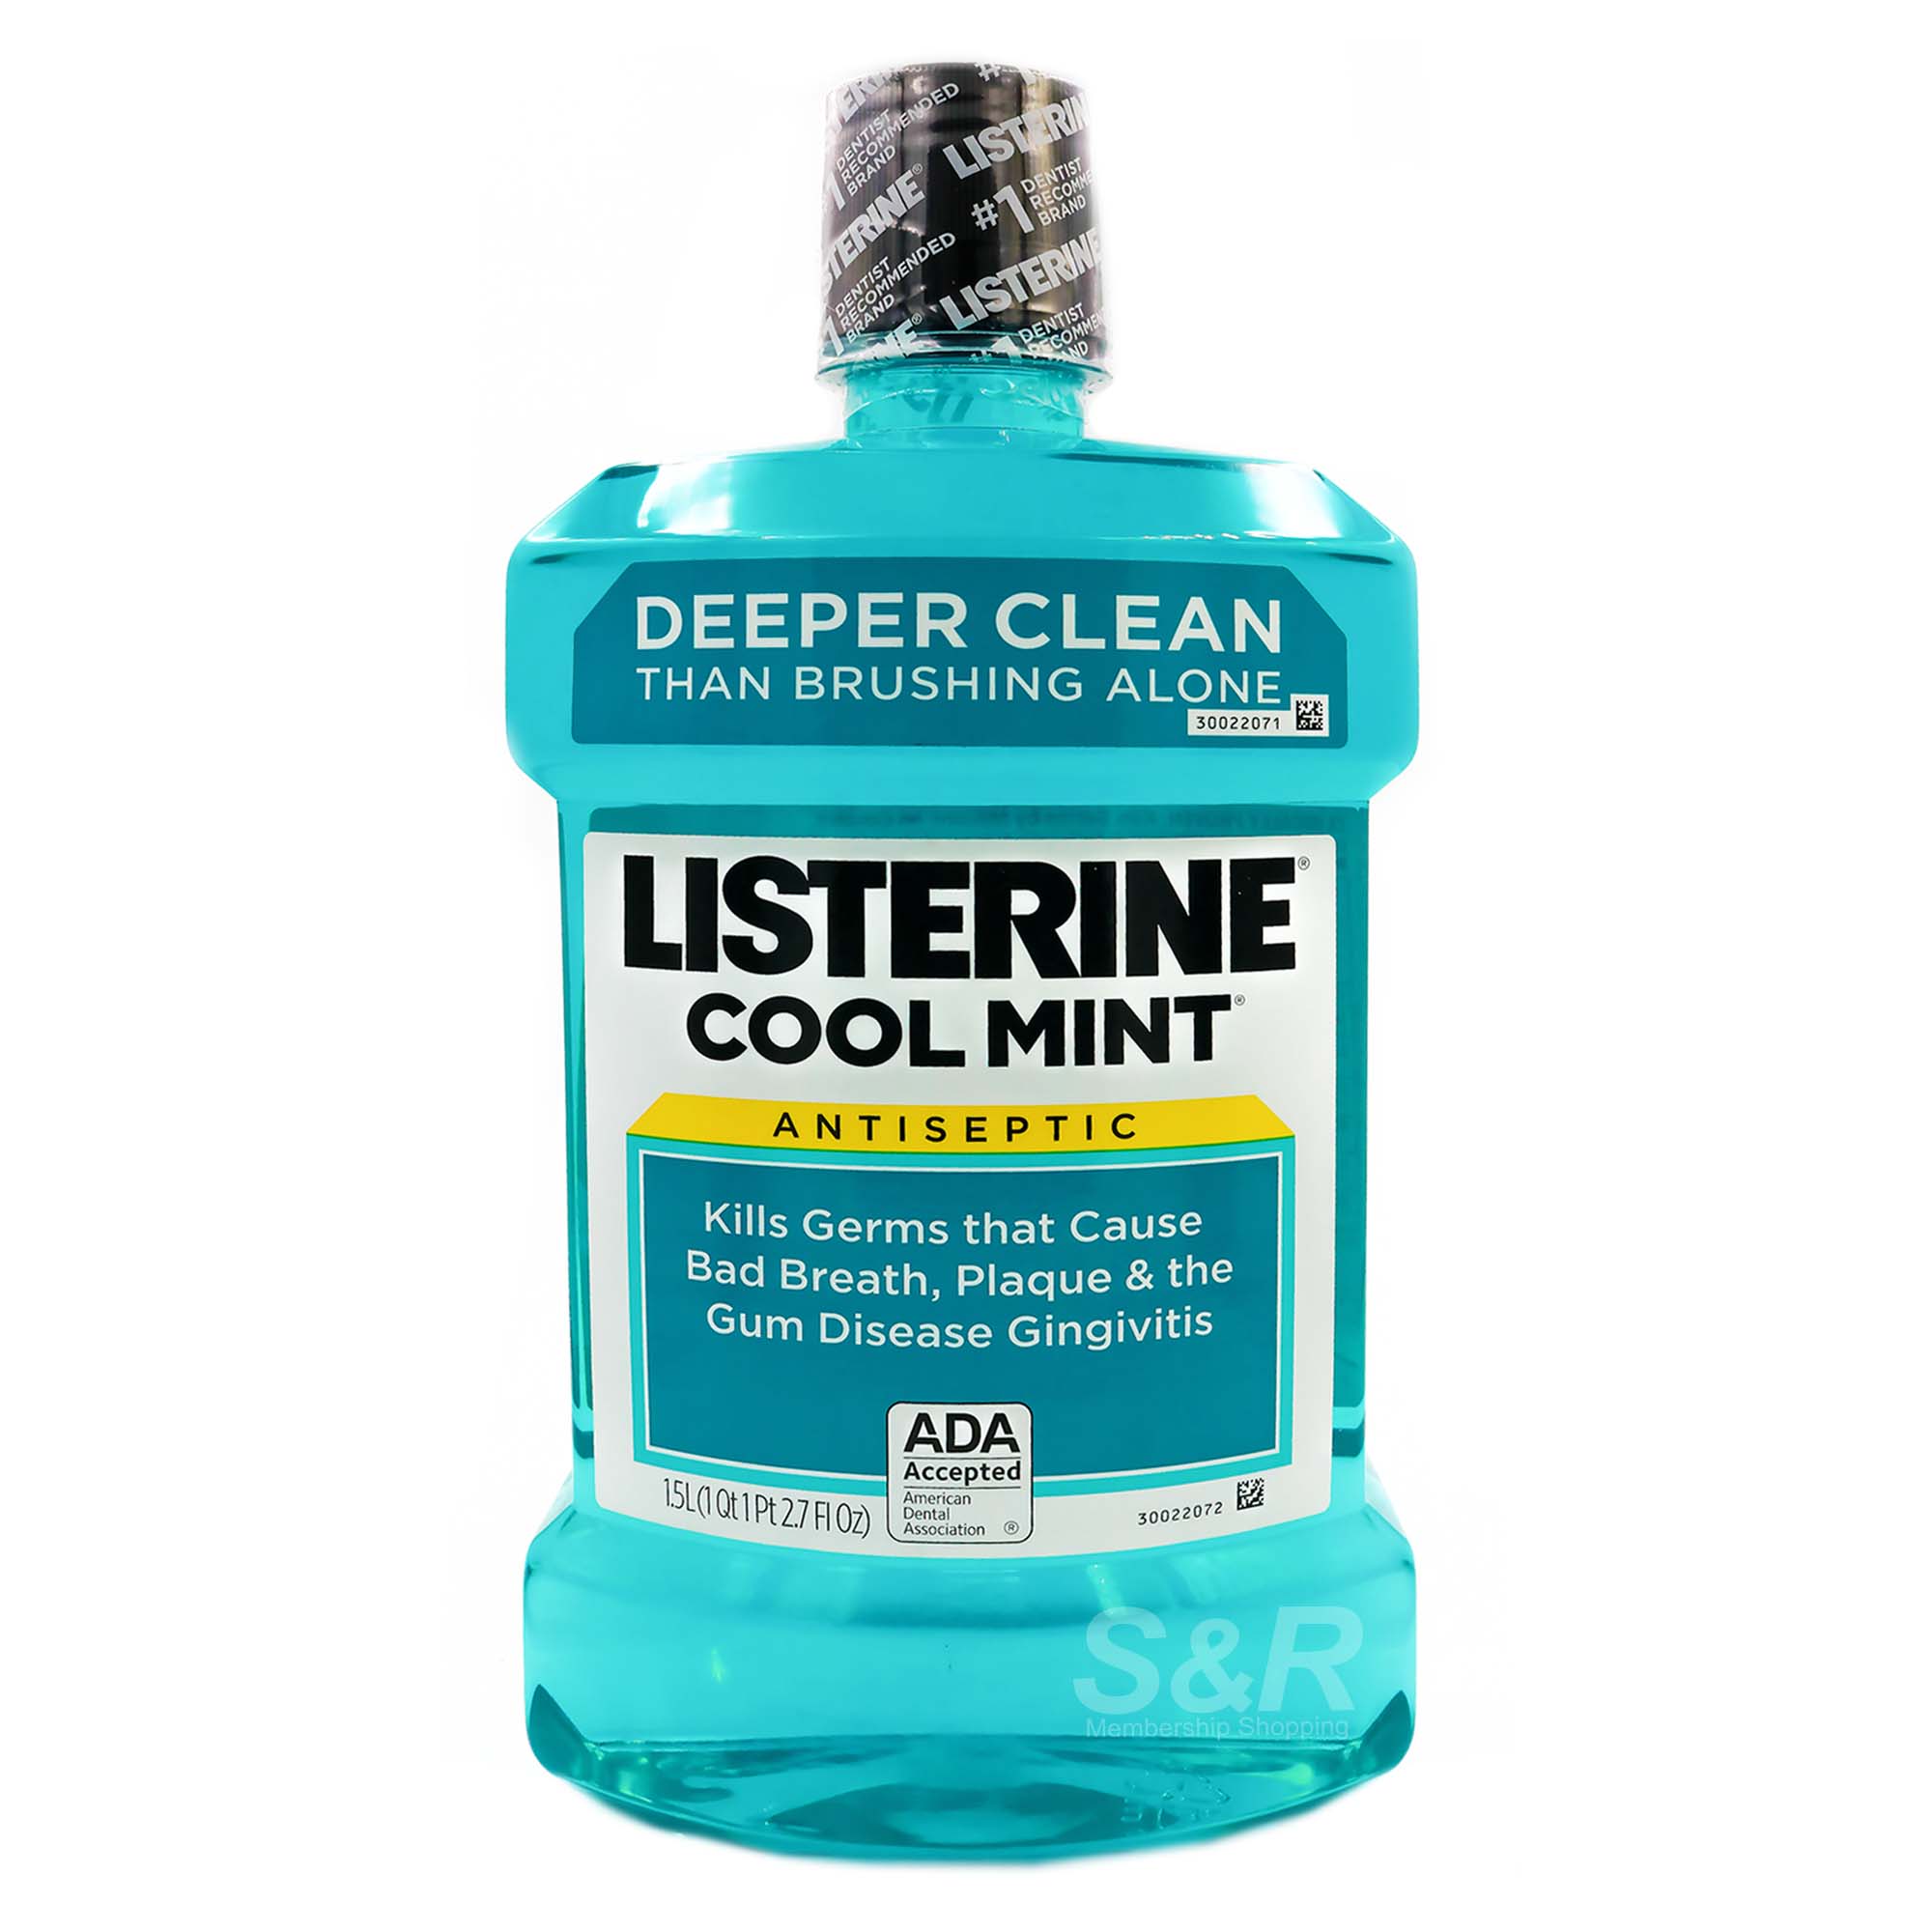 Listerine Cool Mint Antiseptic Mouth Wash 1500mL